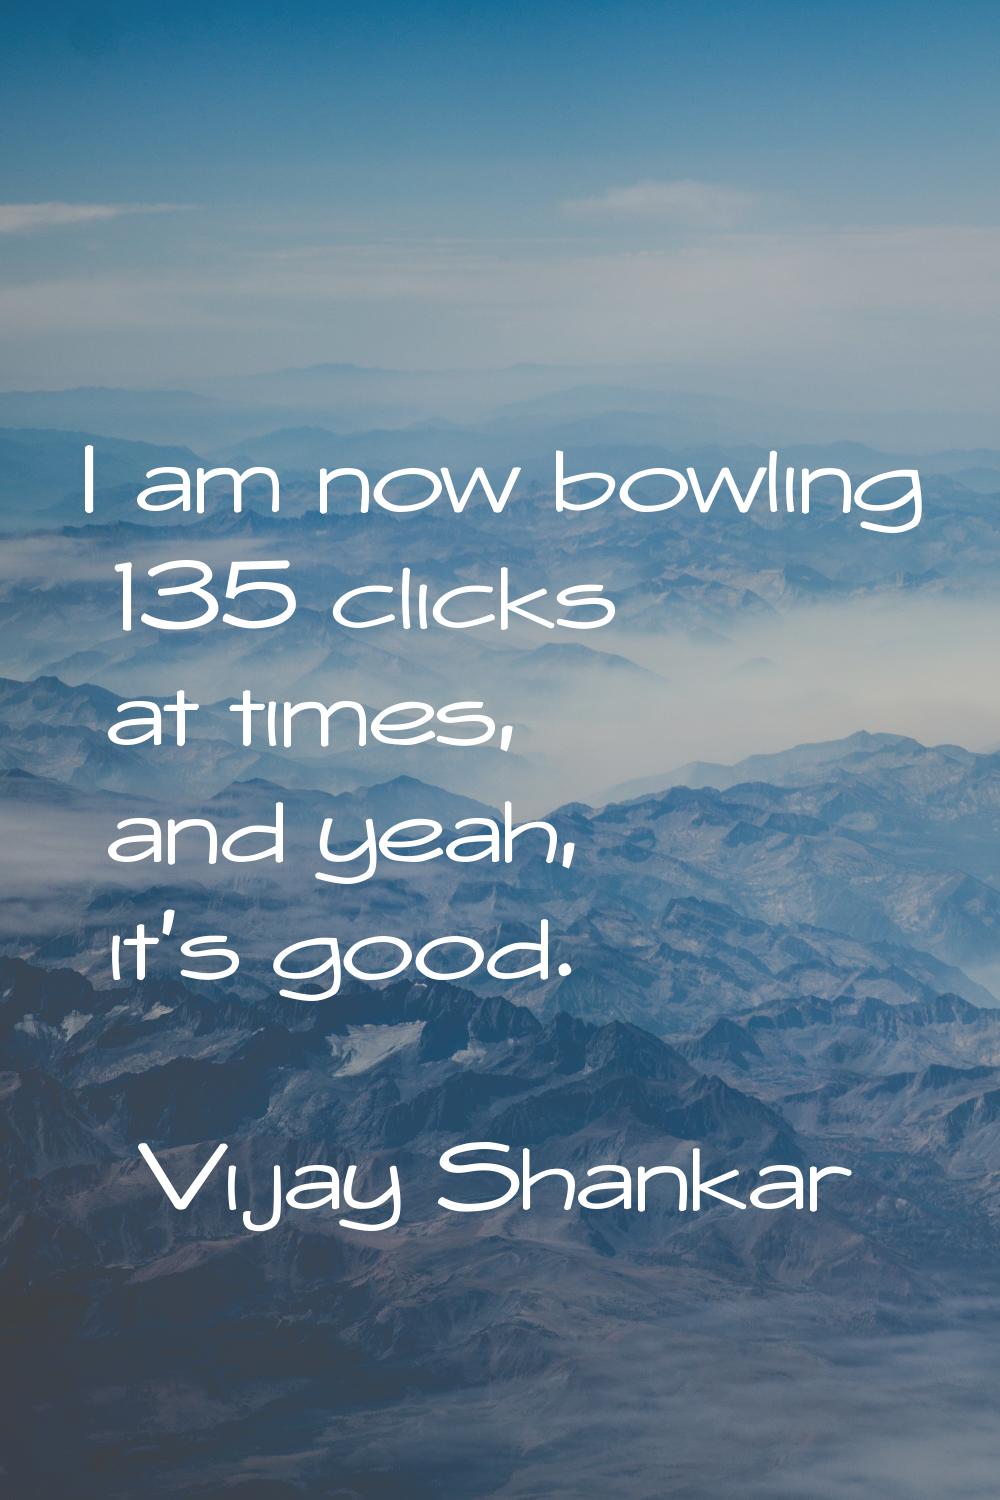 I am now bowling 135 clicks at times, and yeah, it's good.